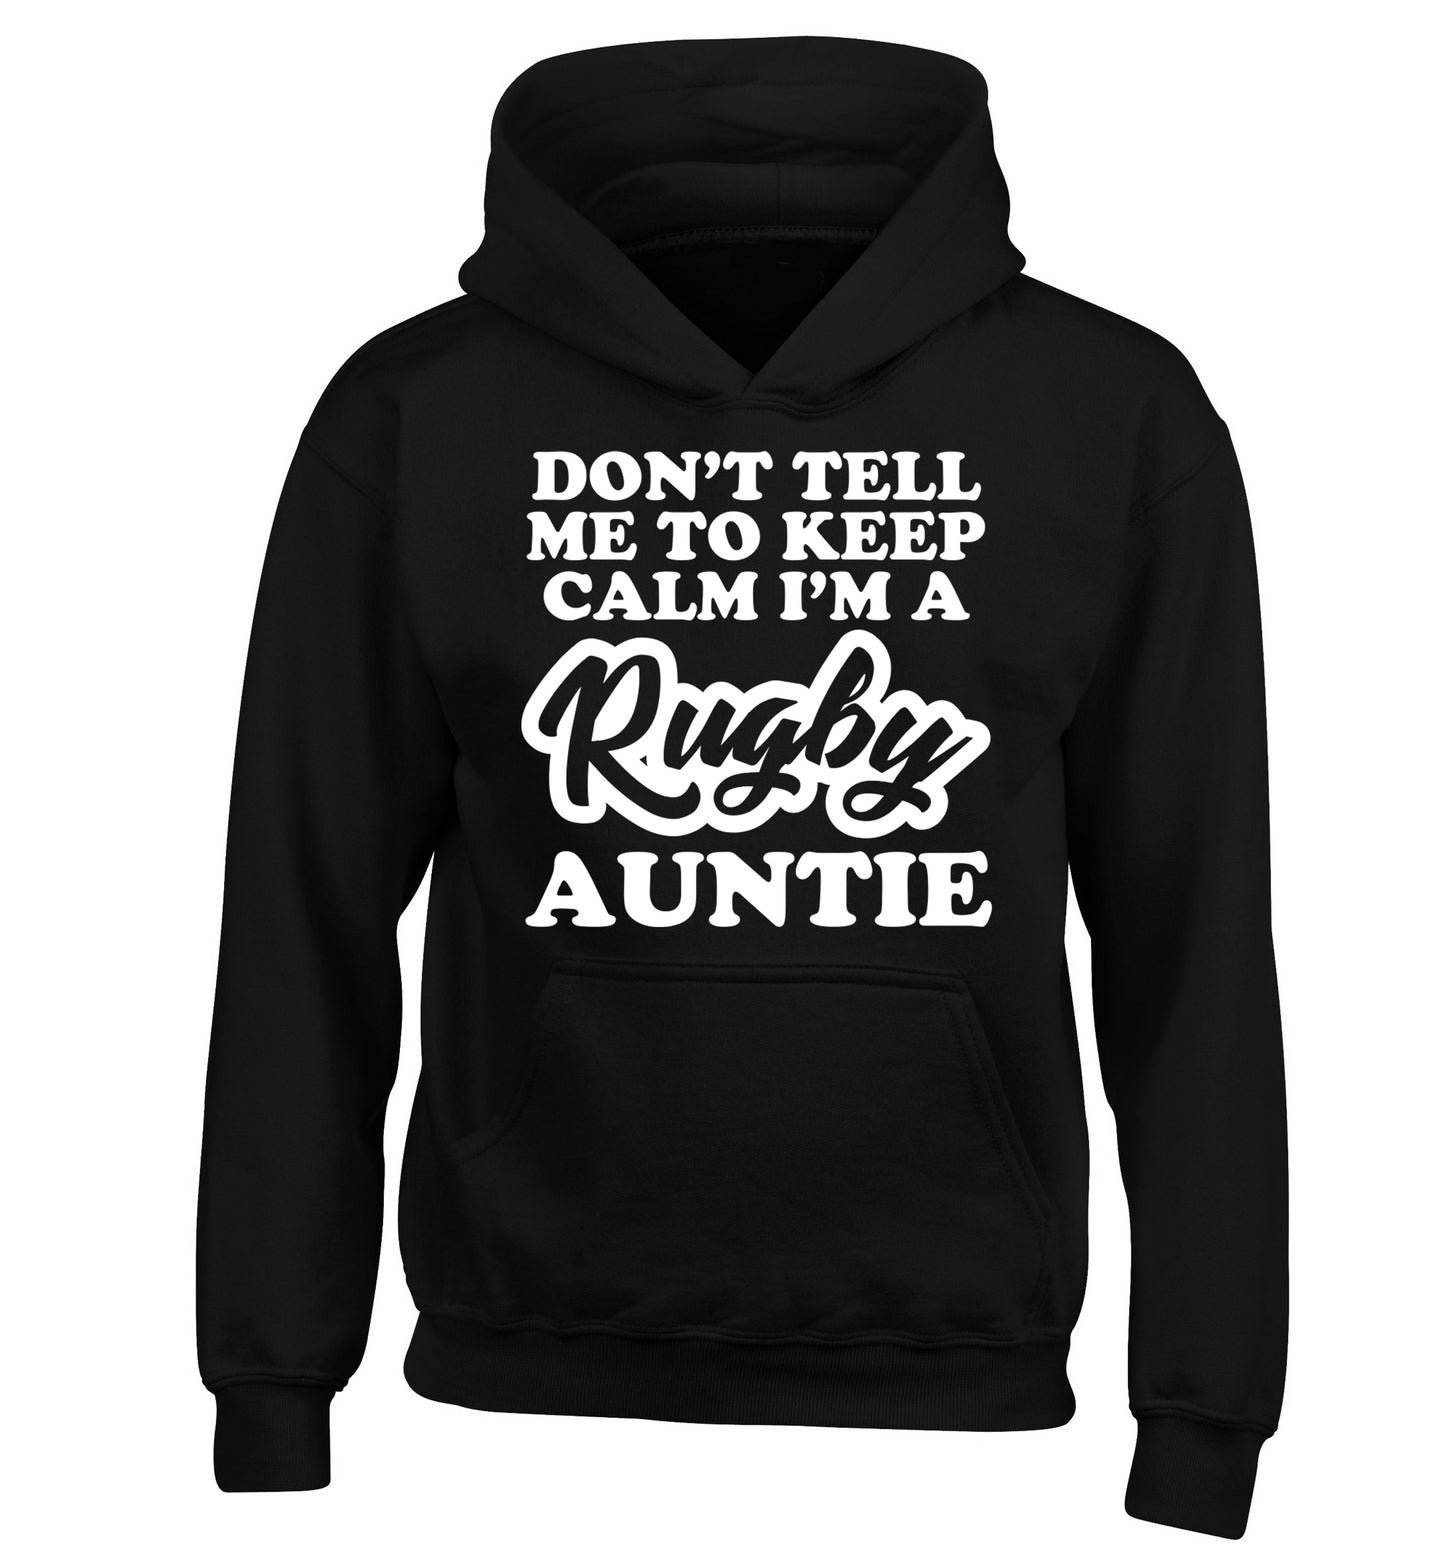 Don't tell me keep calm I'm a rugby auntie children's black hoodie 12-13 Years